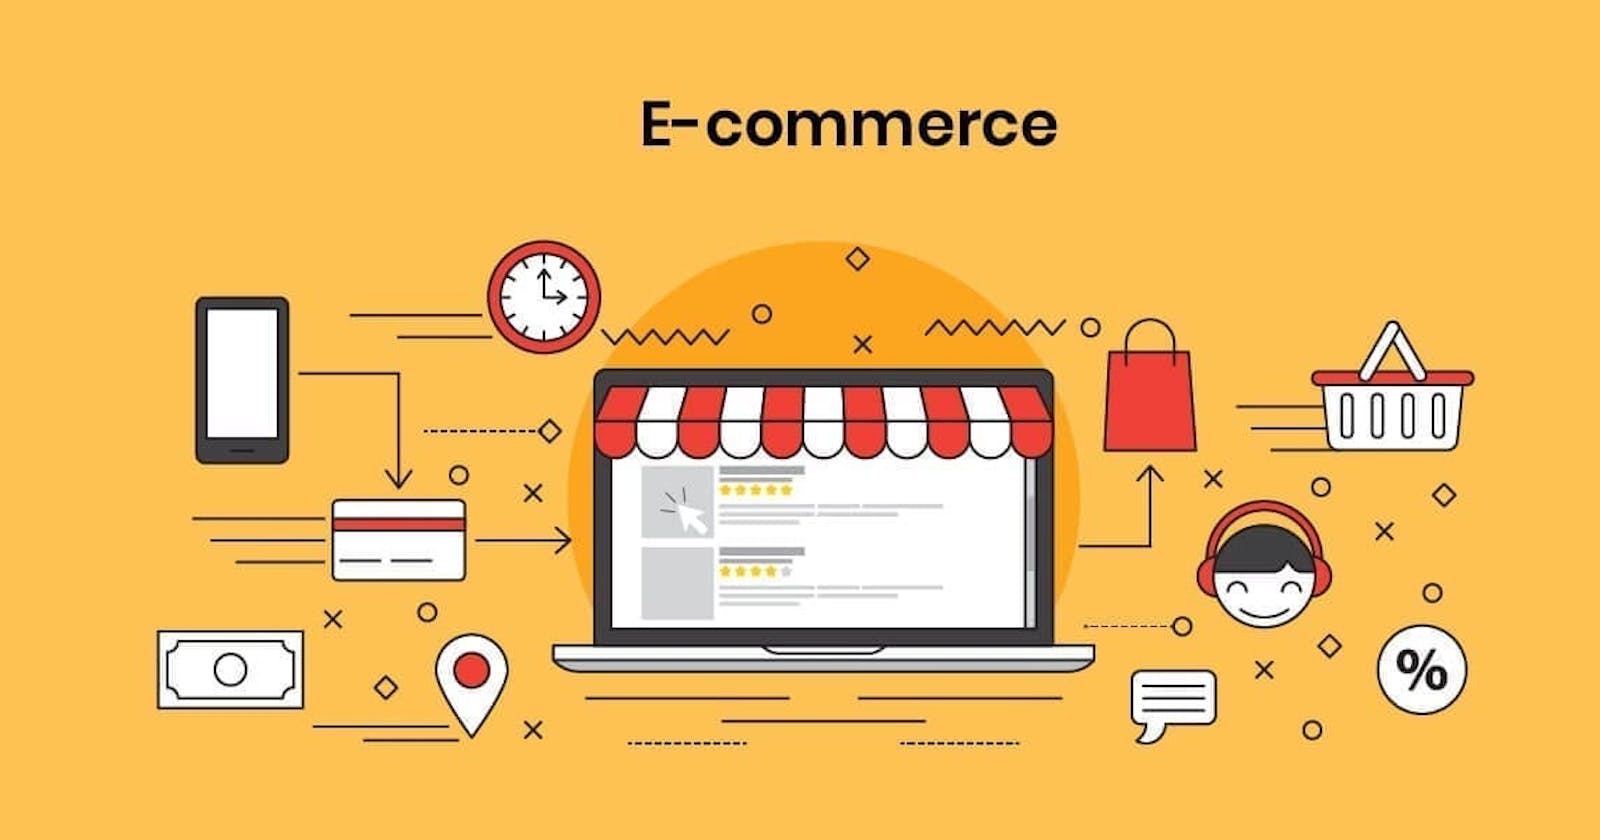 Add this key feature to your eCommerce application in 3 simple steps